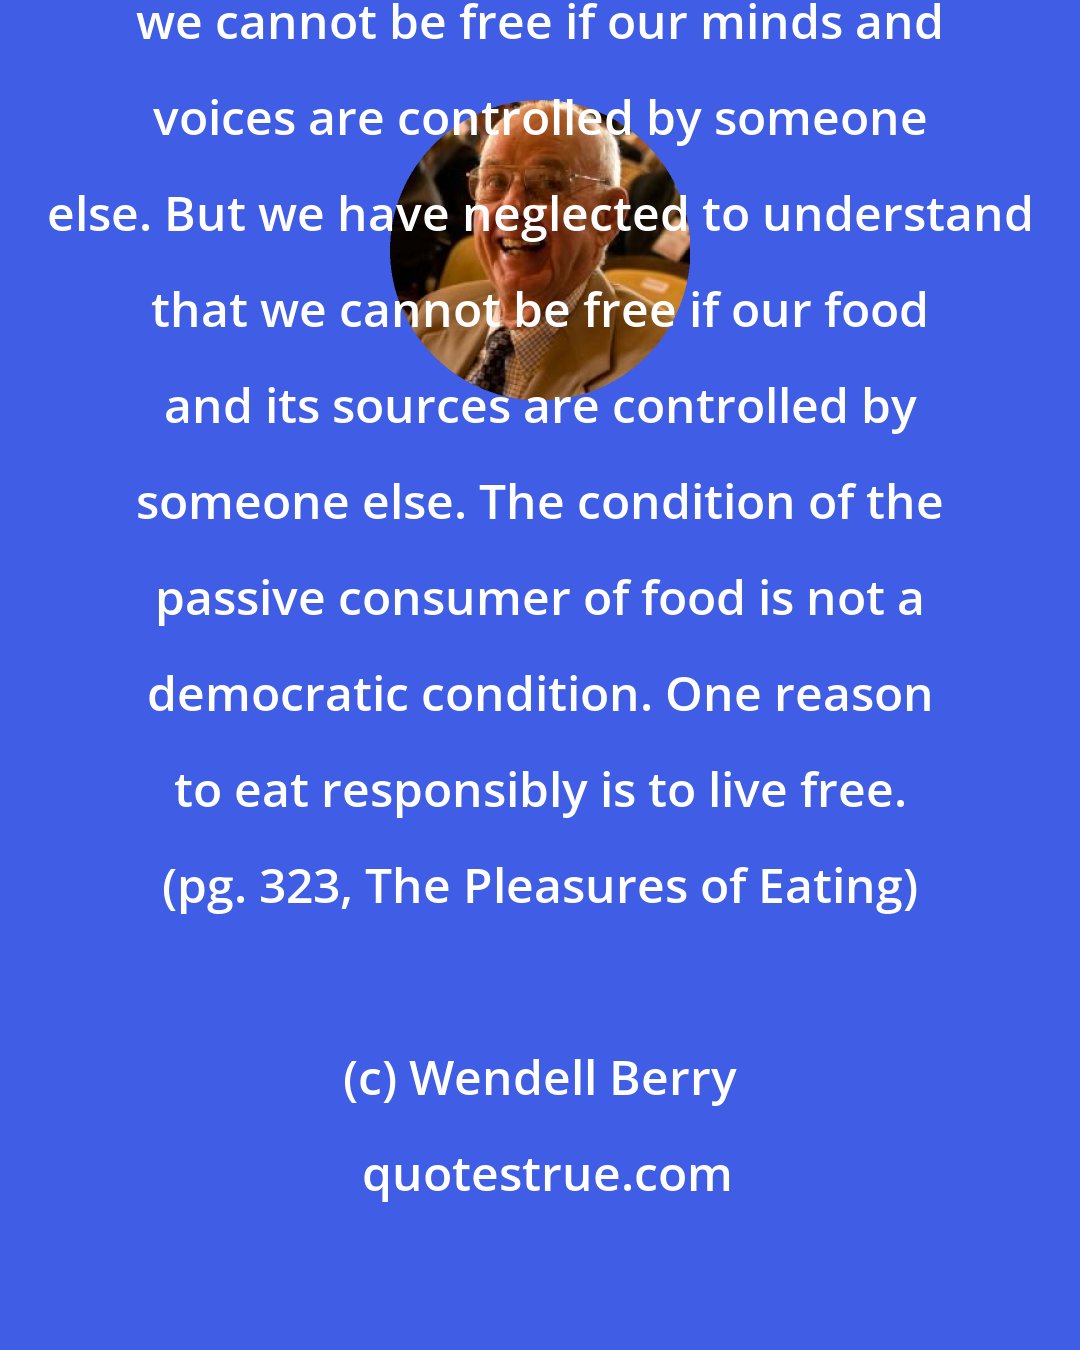 Wendell Berry: We still (sometimes) remember that we cannot be free if our minds and voices are controlled by someone else. But we have neglected to understand that we cannot be free if our food and its sources are controlled by someone else. The condition of the passive consumer of food is not a democratic condition. One reason to eat responsibly is to live free. (pg. 323, The Pleasures of Eating)